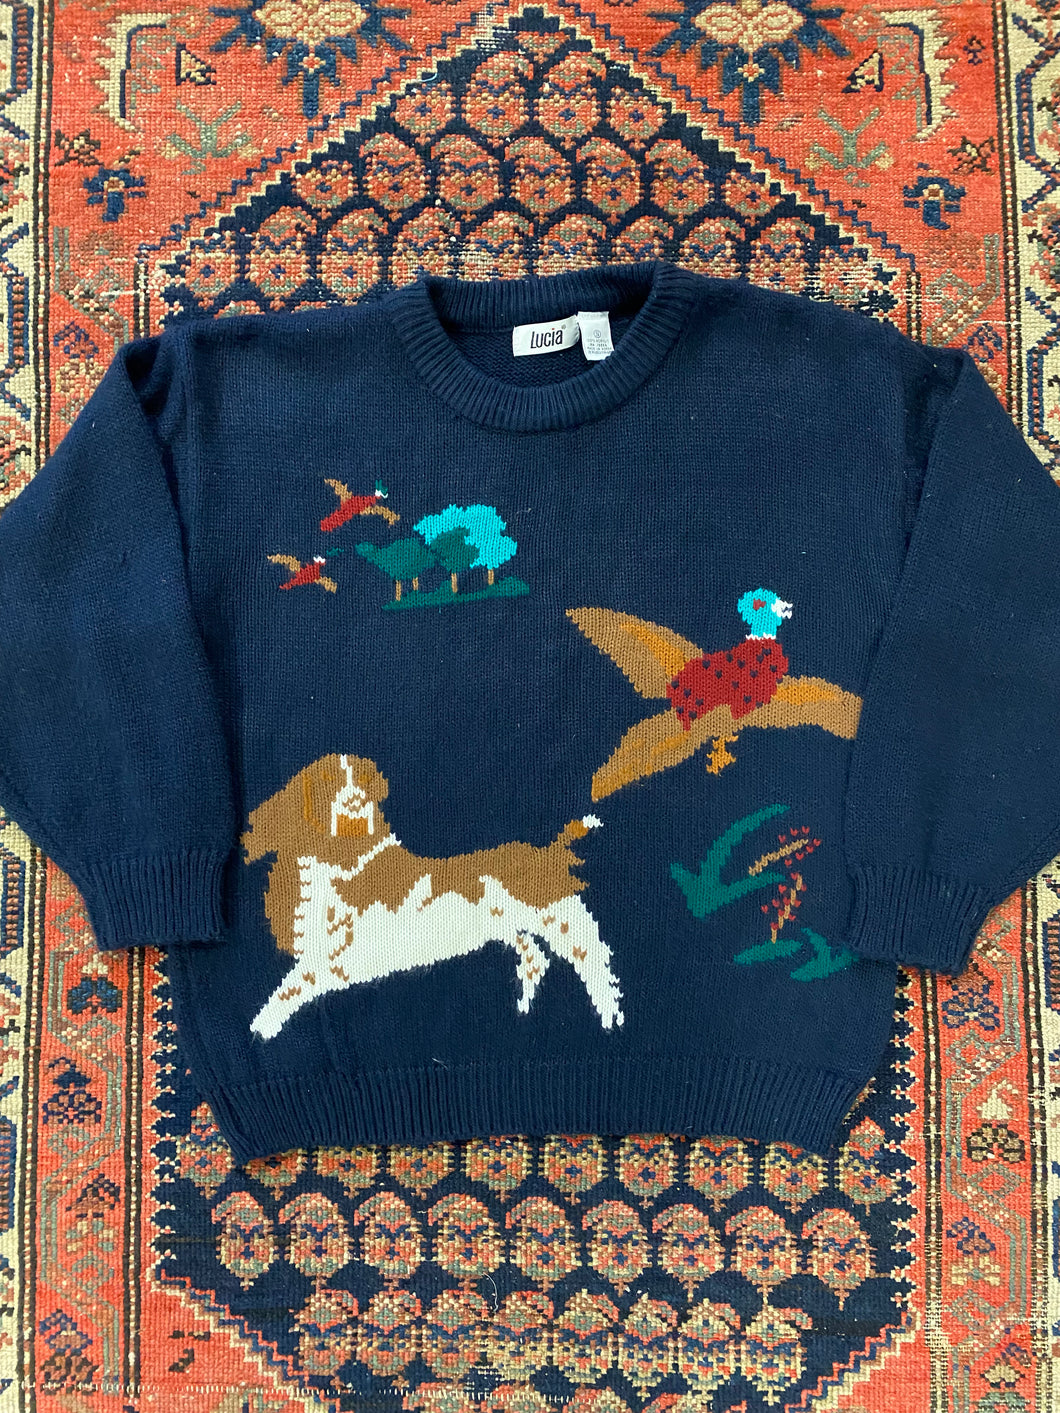 90s Printed Knit Sweater - S